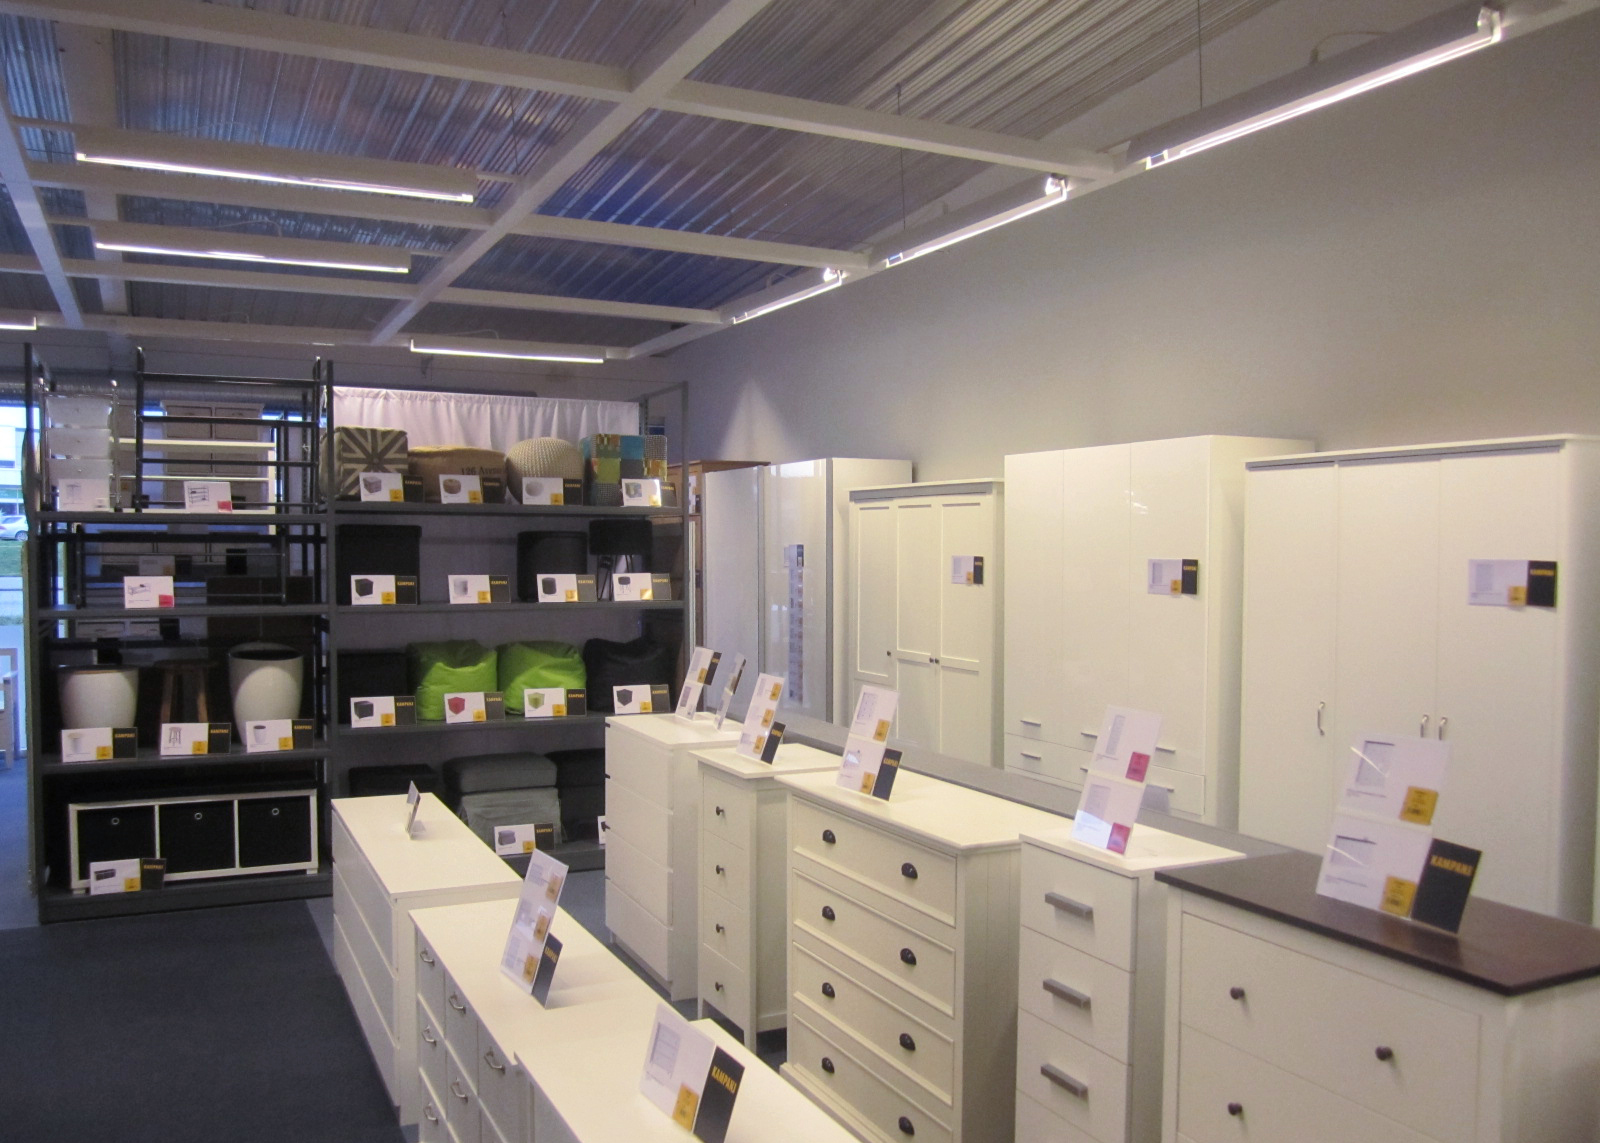 Tego can provide bespoke ceiling and lighting solutions for your business.